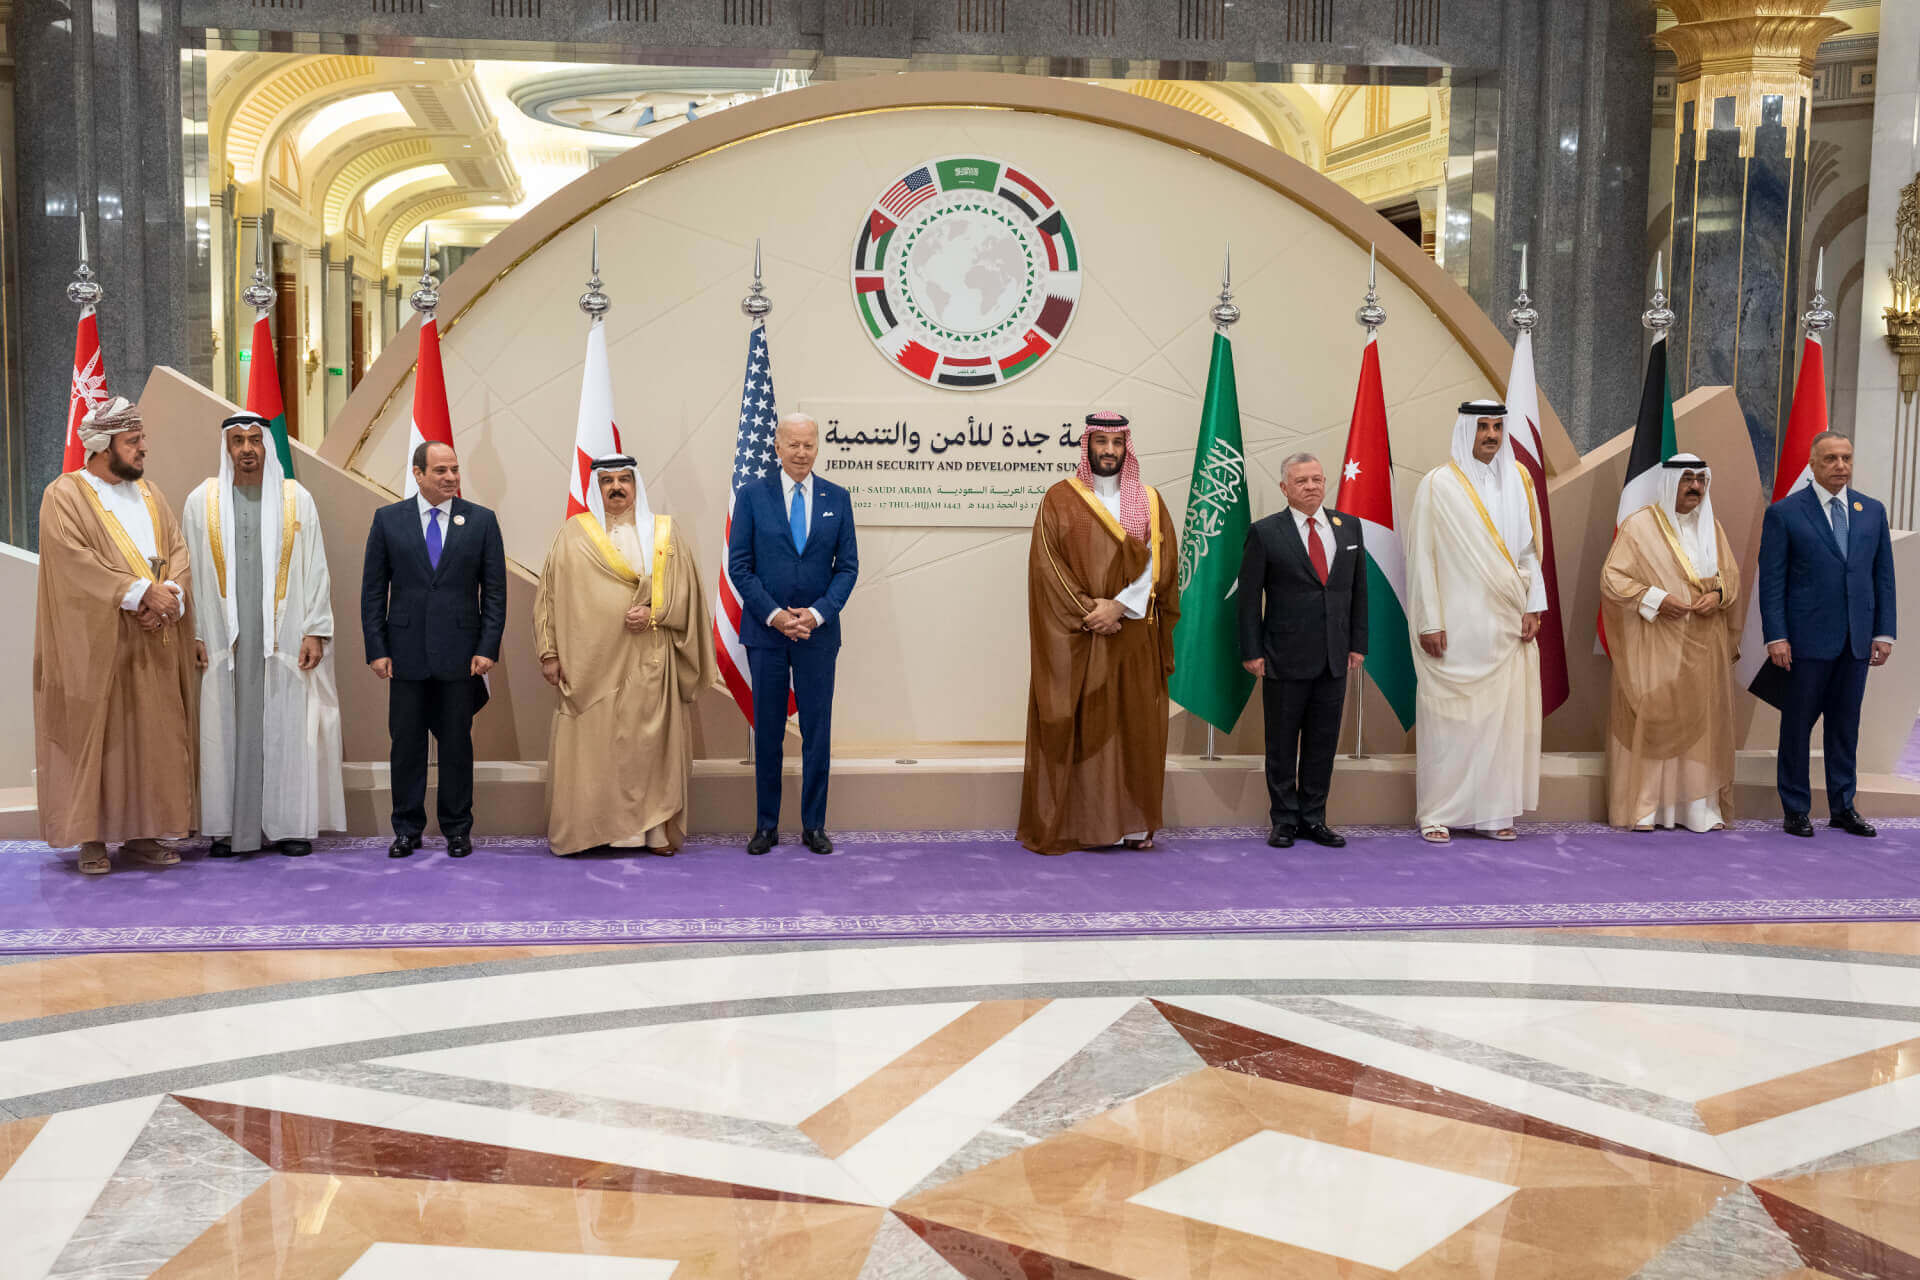 US Will Remain “Engaged Partner” in Middle East, Biden Says At GCC Summit